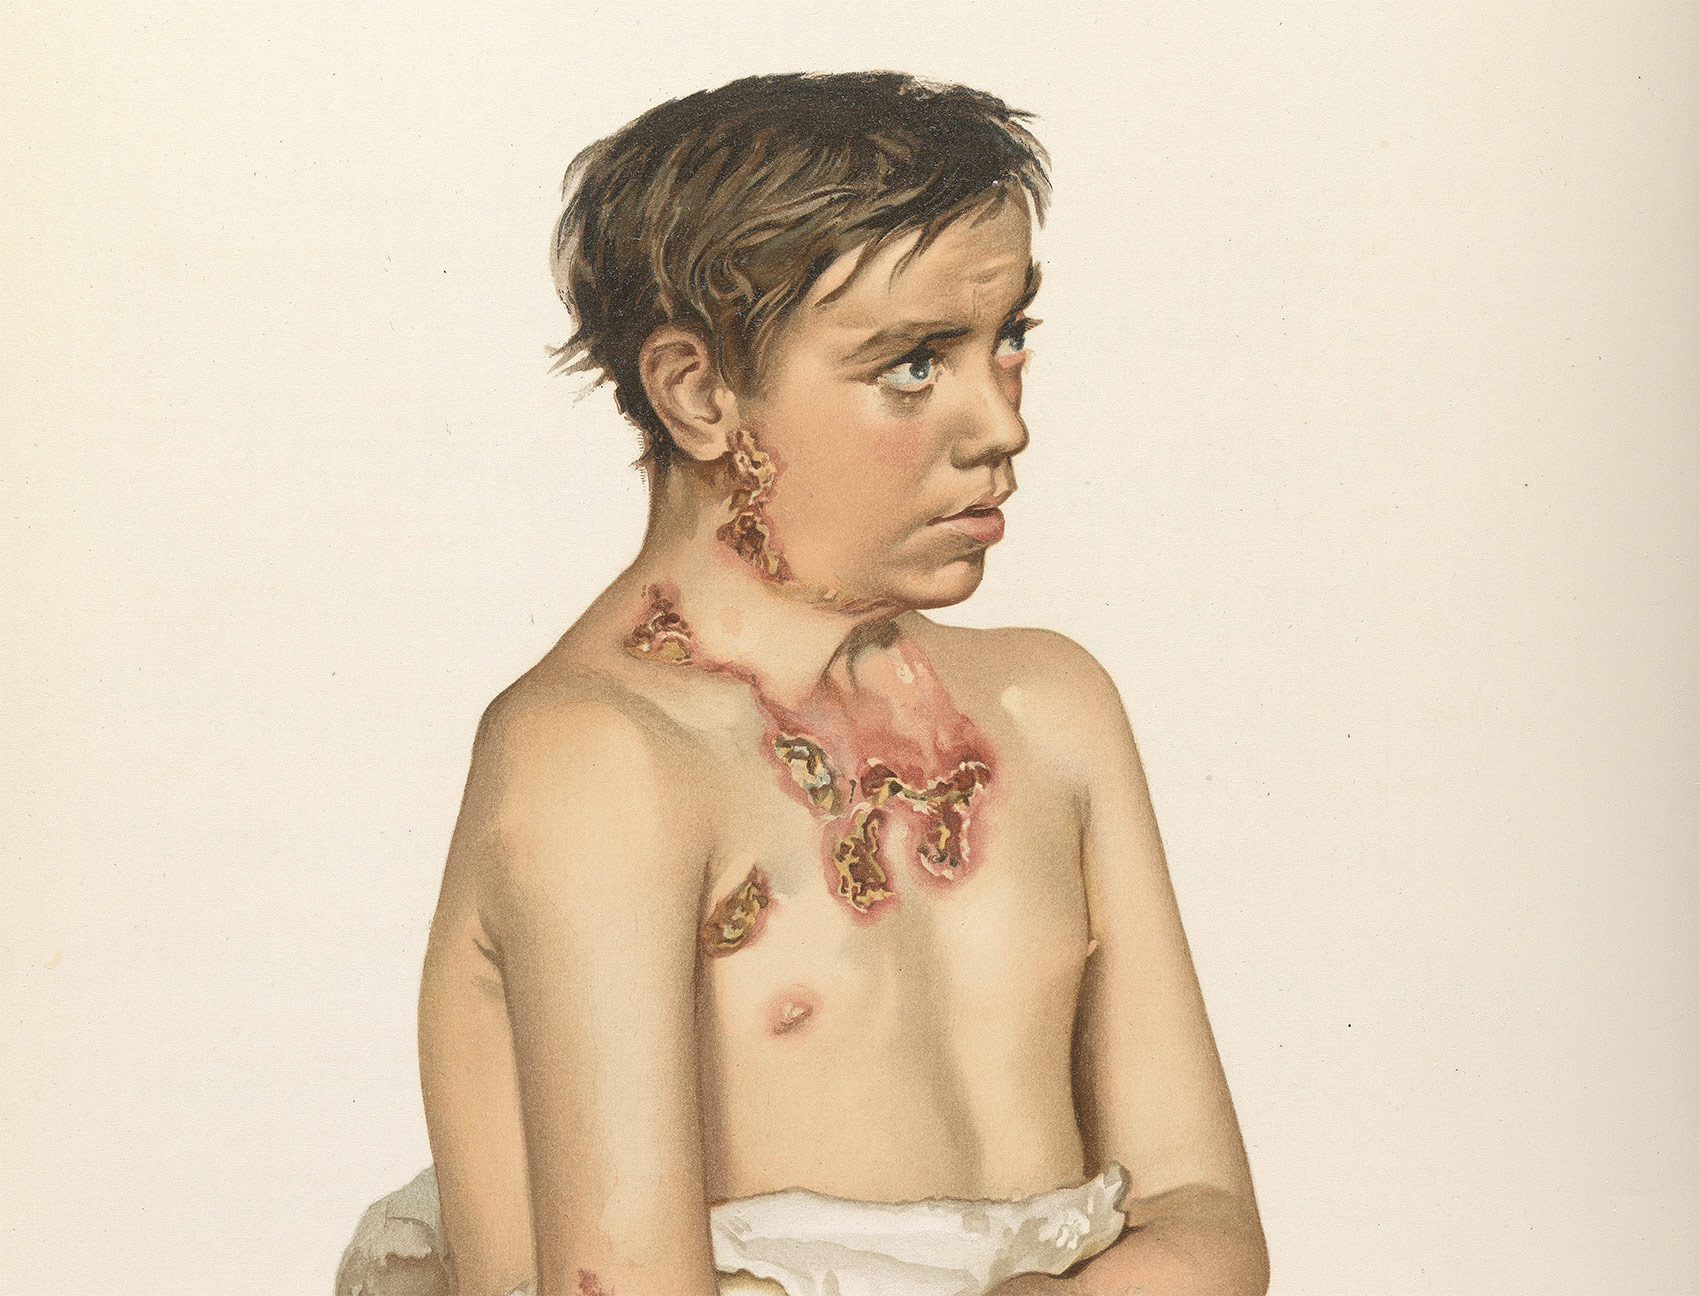 'A young man with scrofula', Atlas of Clinical Medicine, 1892-96.